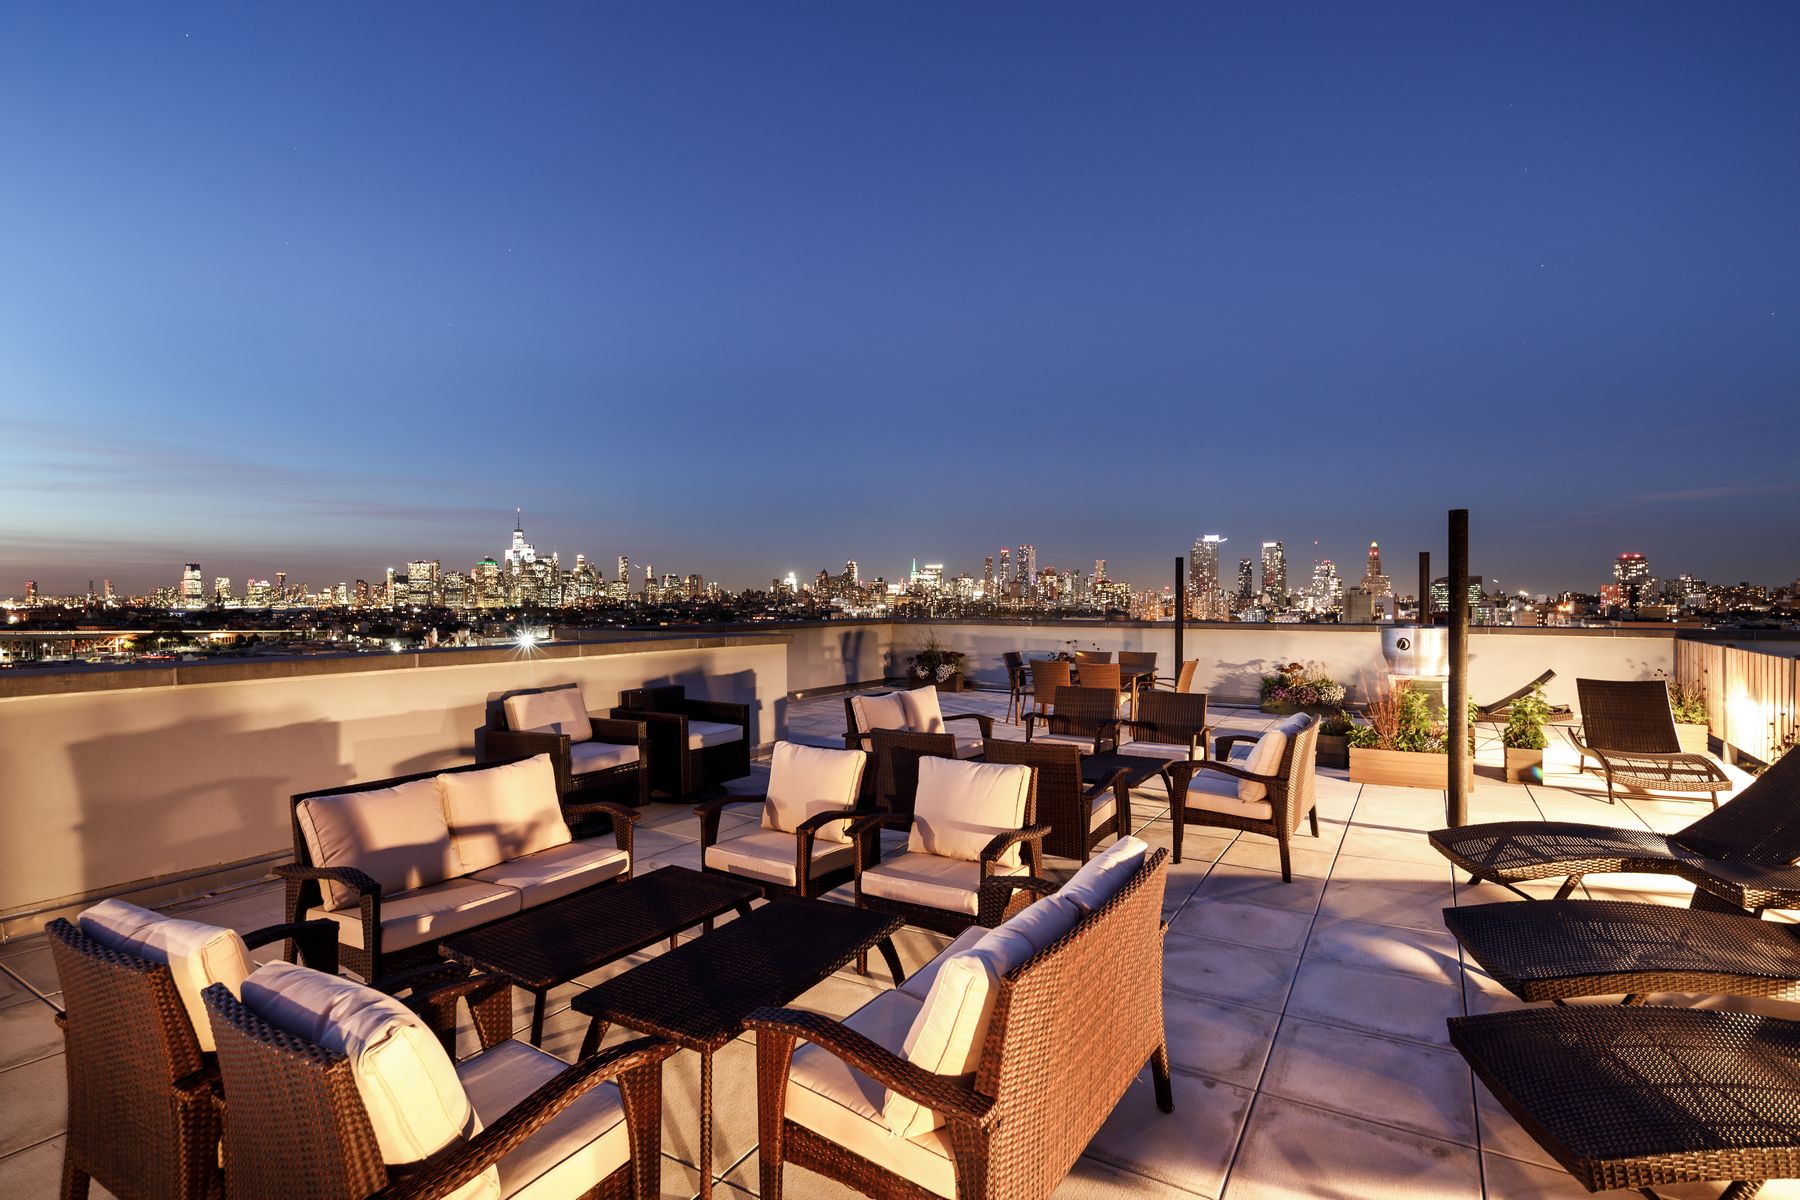 Rooftop deck with ample seating and lounge chairs at night with city views